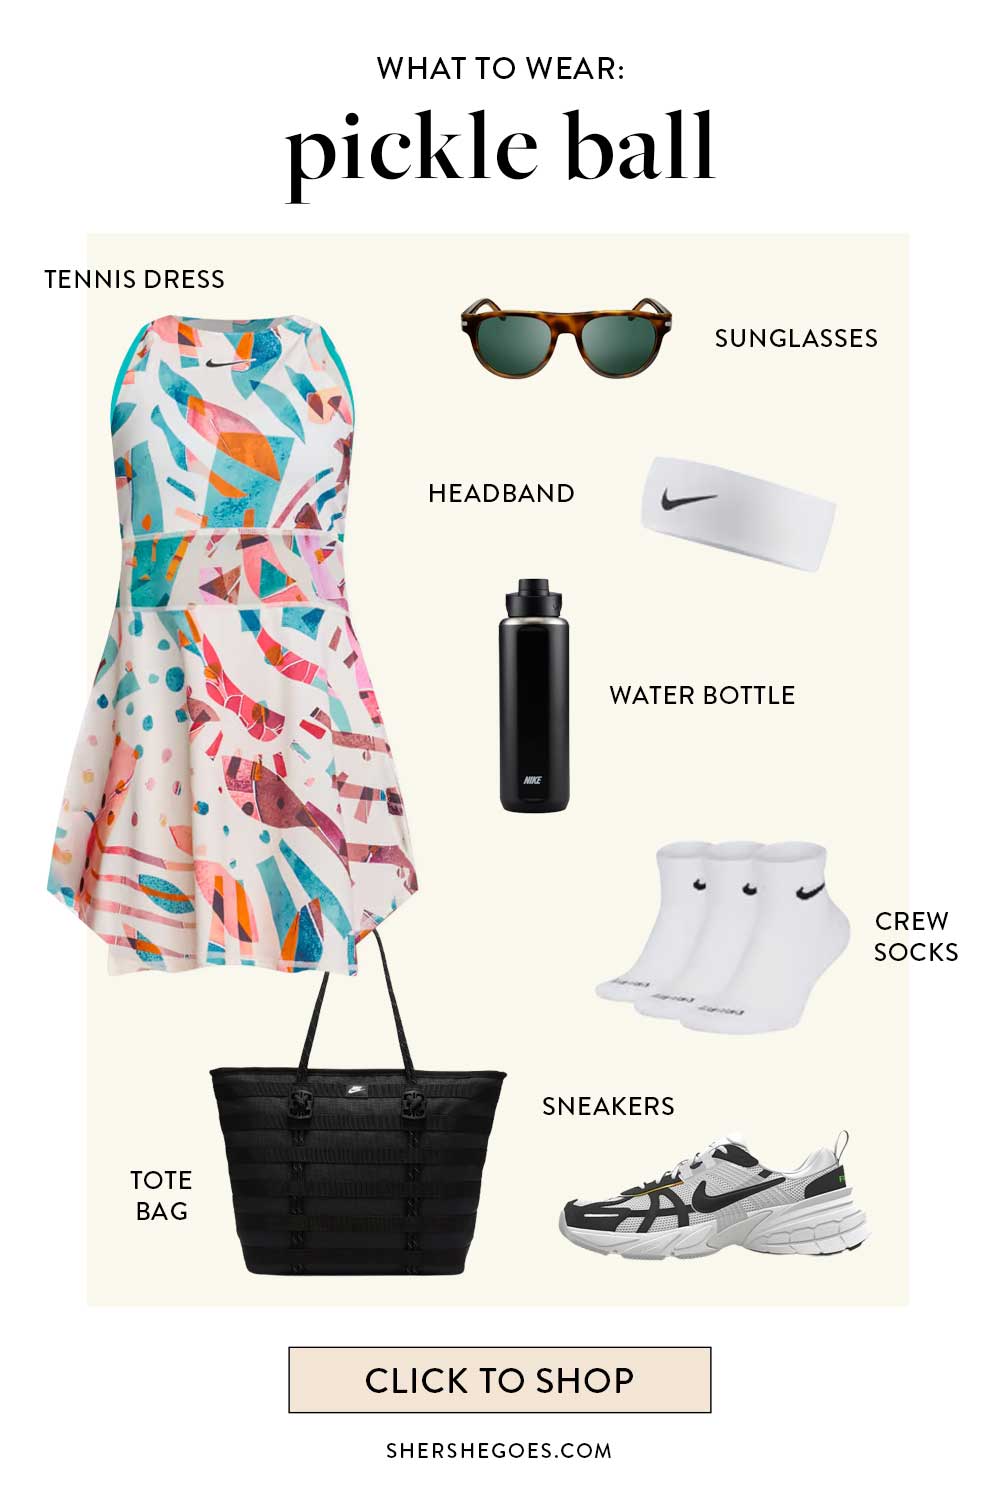 pickleball-outfits-women